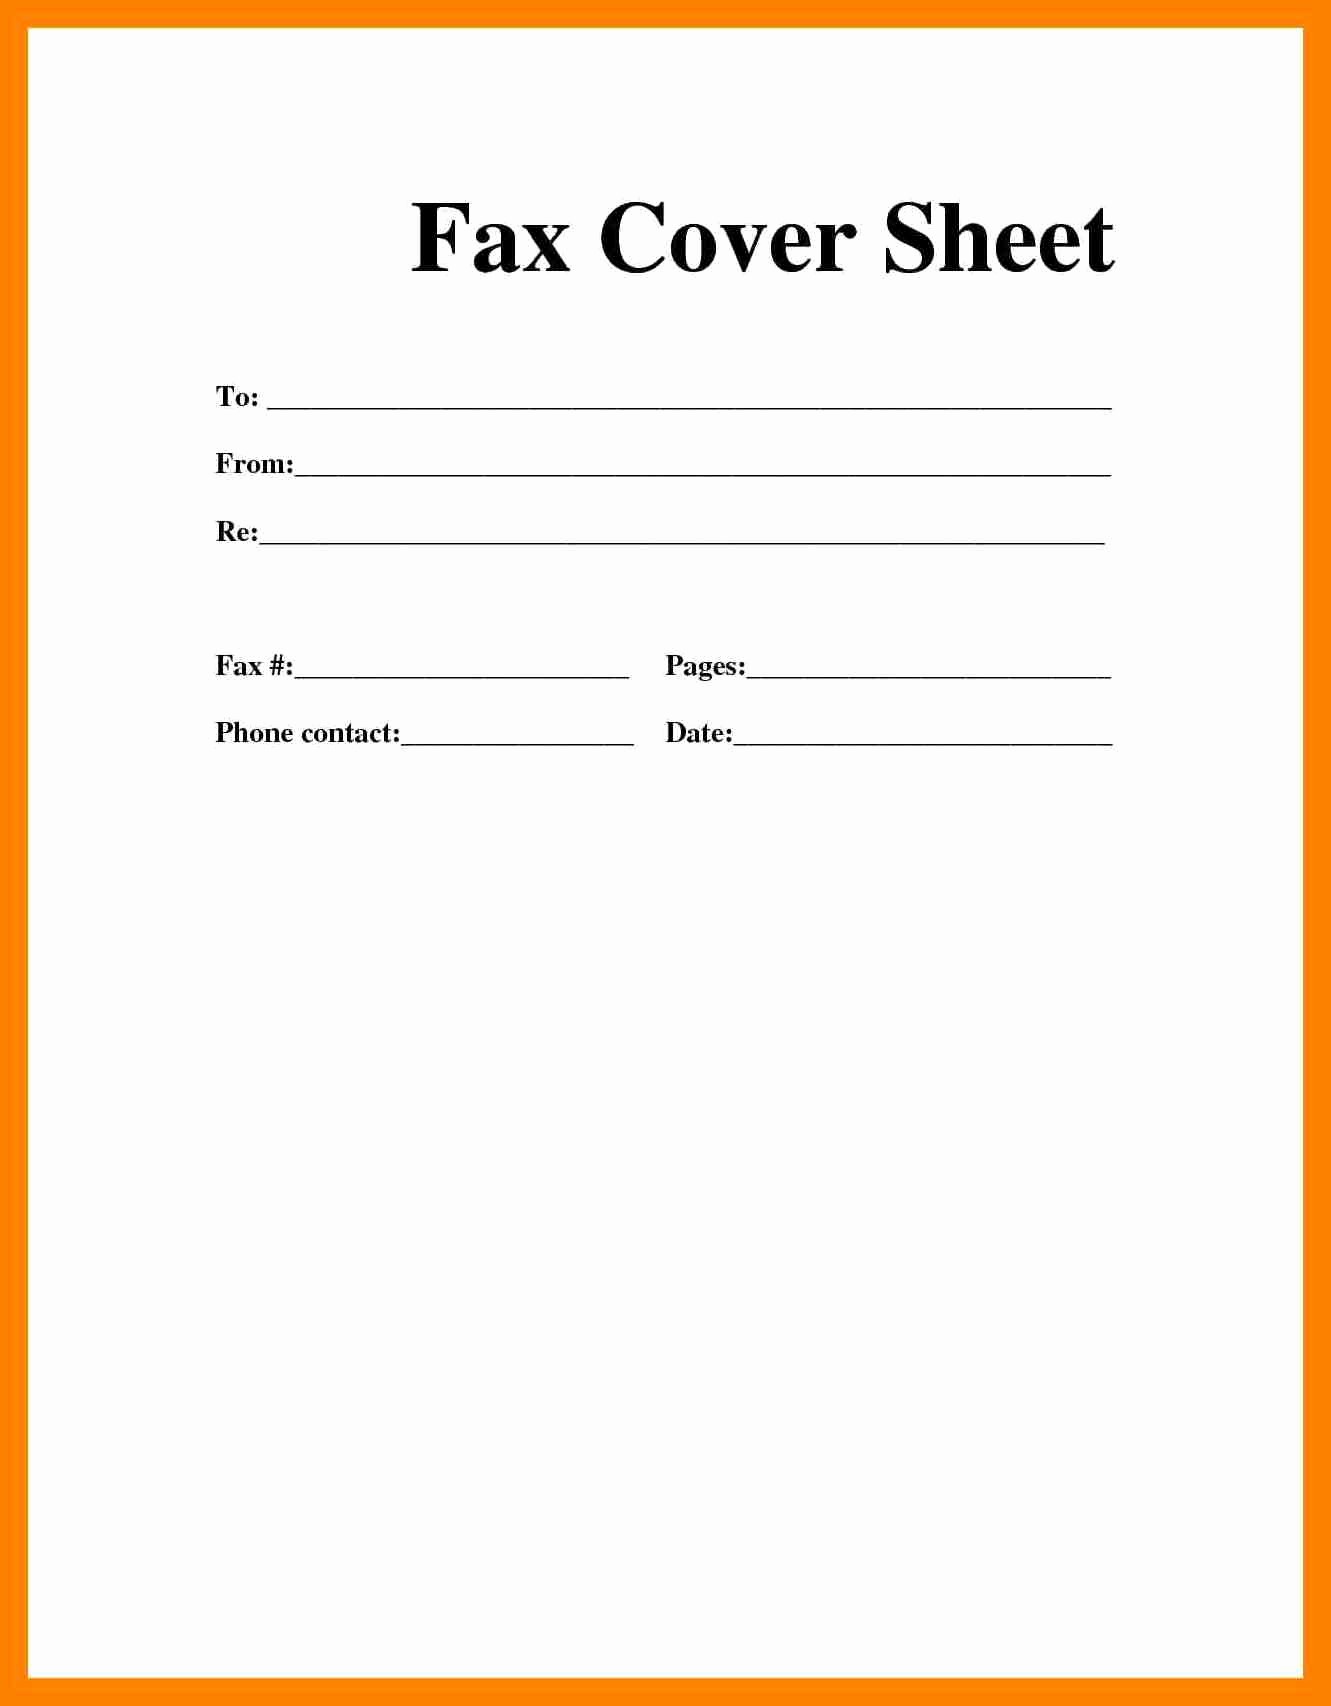 How to Fax Cover Sheet Awesome Fax Cover Sheet Blank Portablegasgrillweber